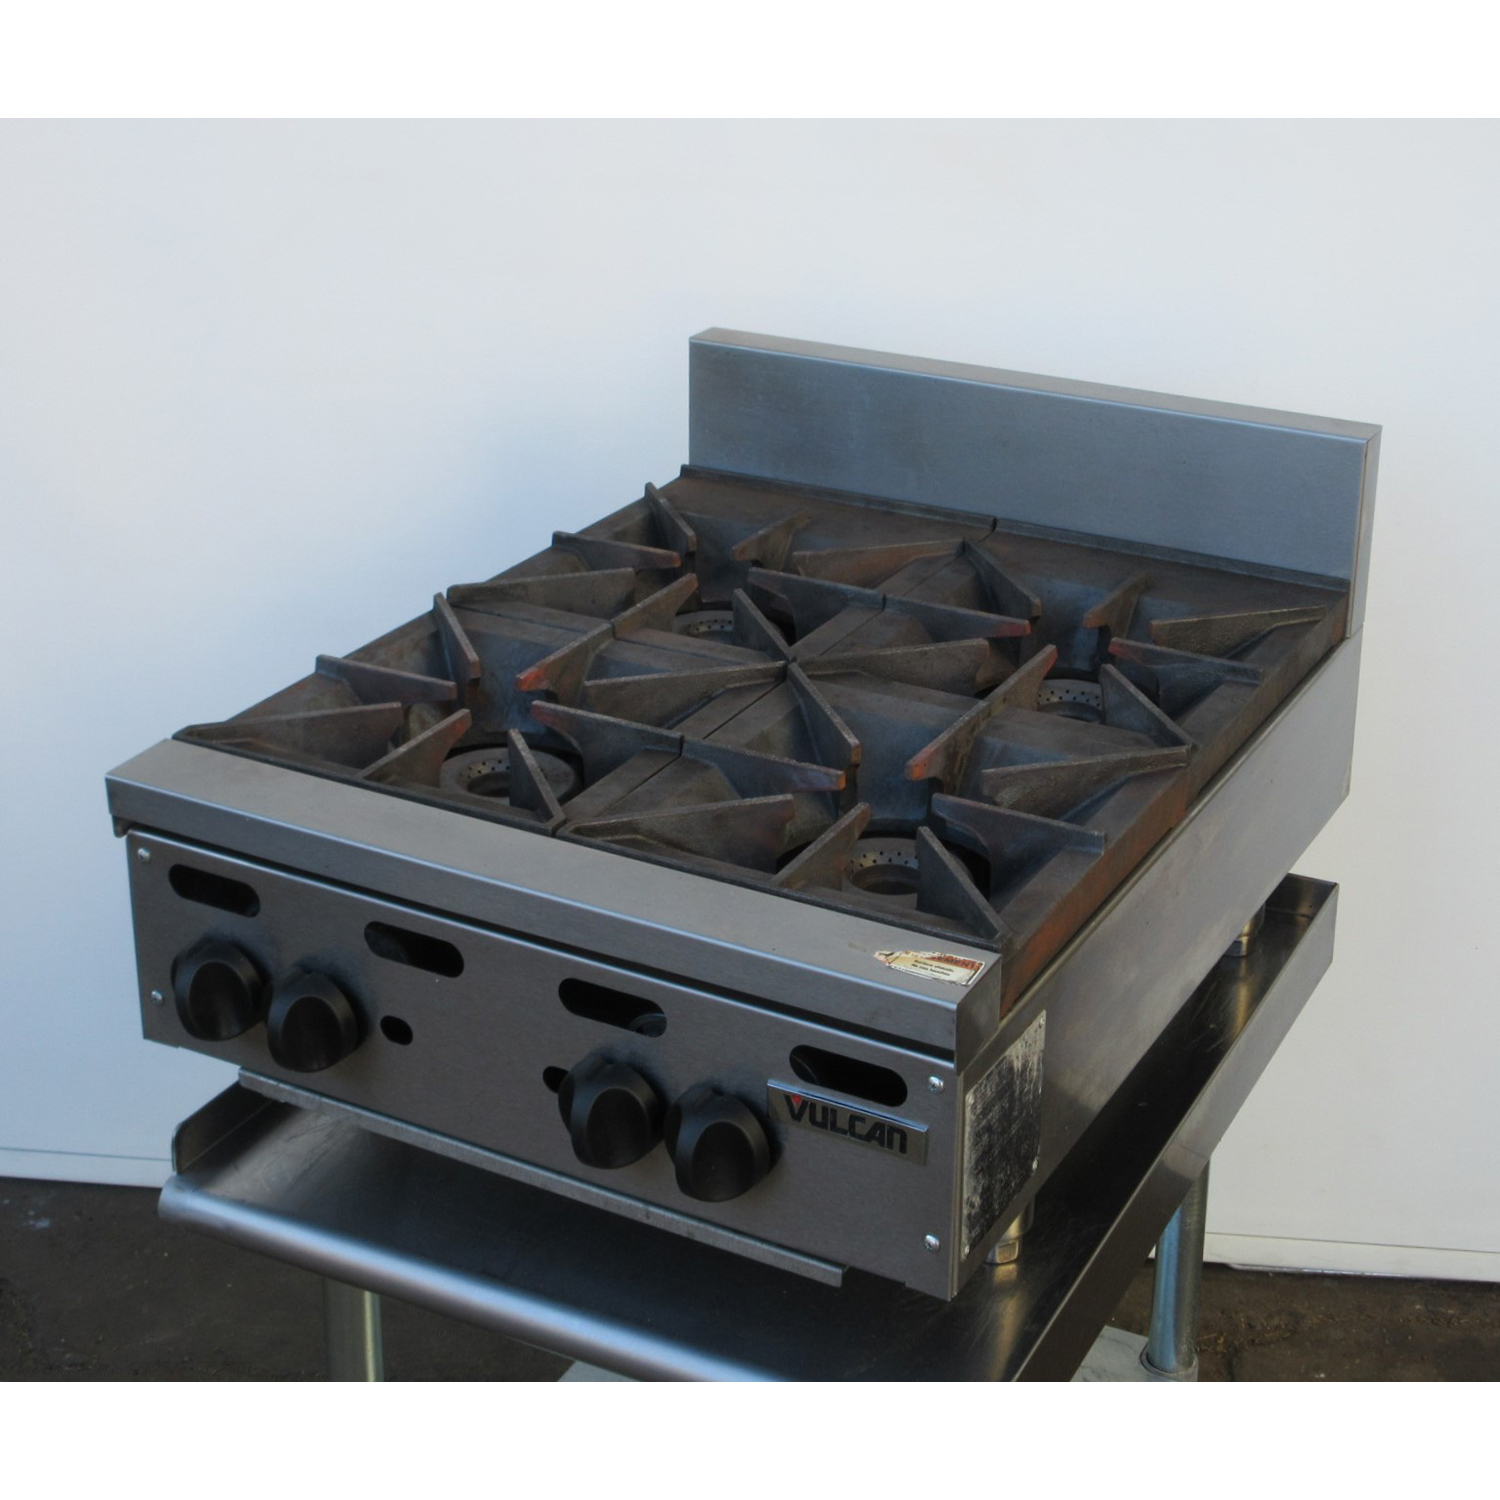 Vulcan VHP424 Natural Gas 24" 4 Burner Countertop Range W/Stand, Used Excellent Condition image 1